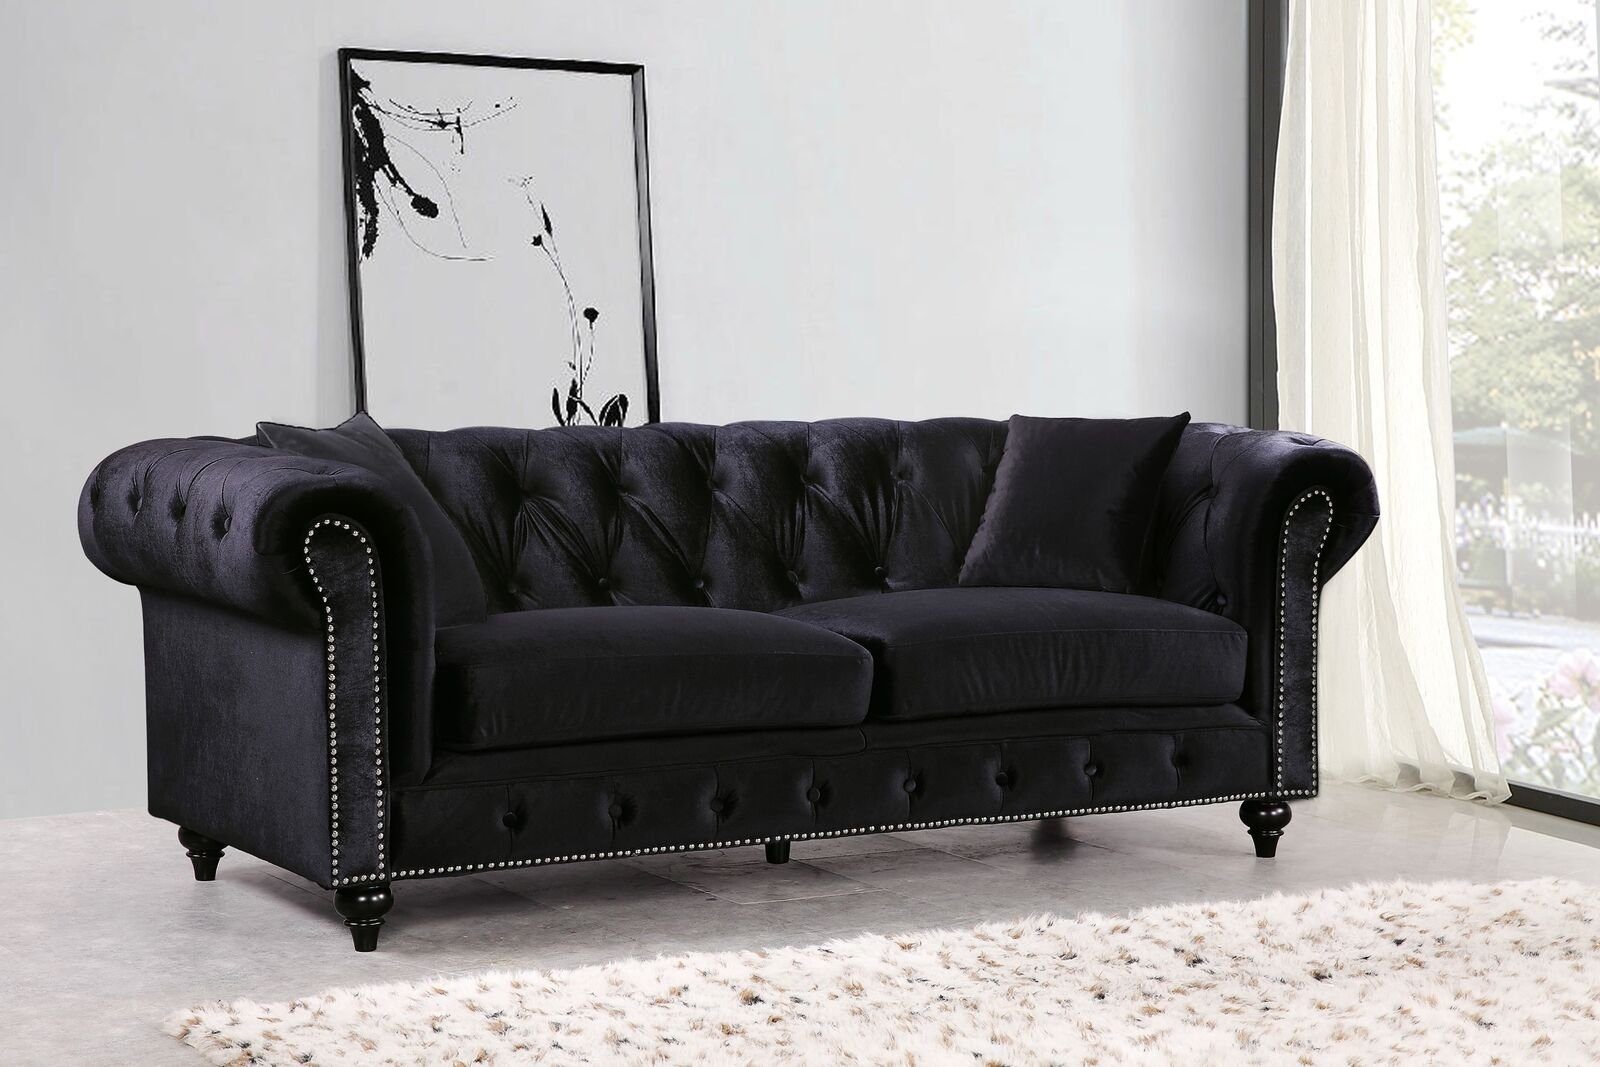 Couch Sofa Chesterfield-Sofa, Chesterfield Design Luxus Polster JVmoebel